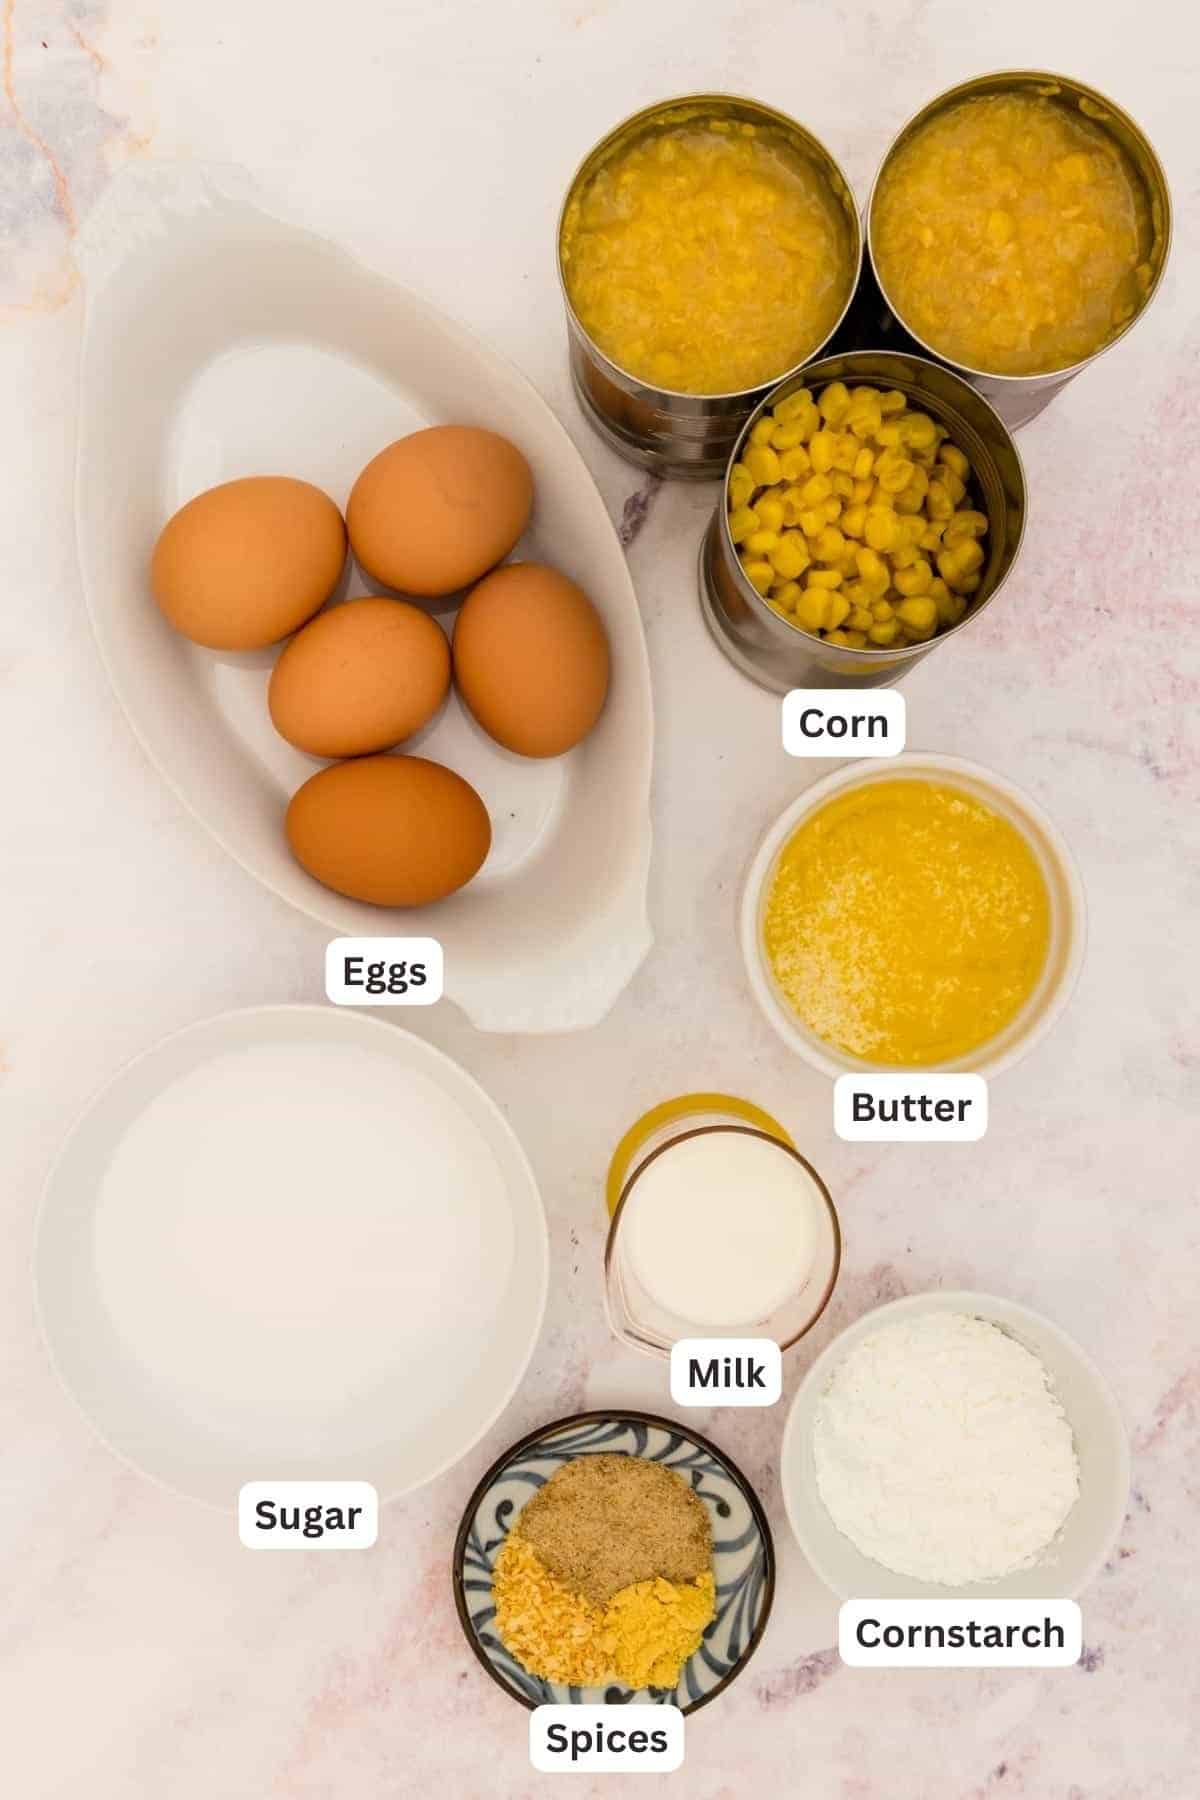 Ingredients to make Corn Pudding Casserole.